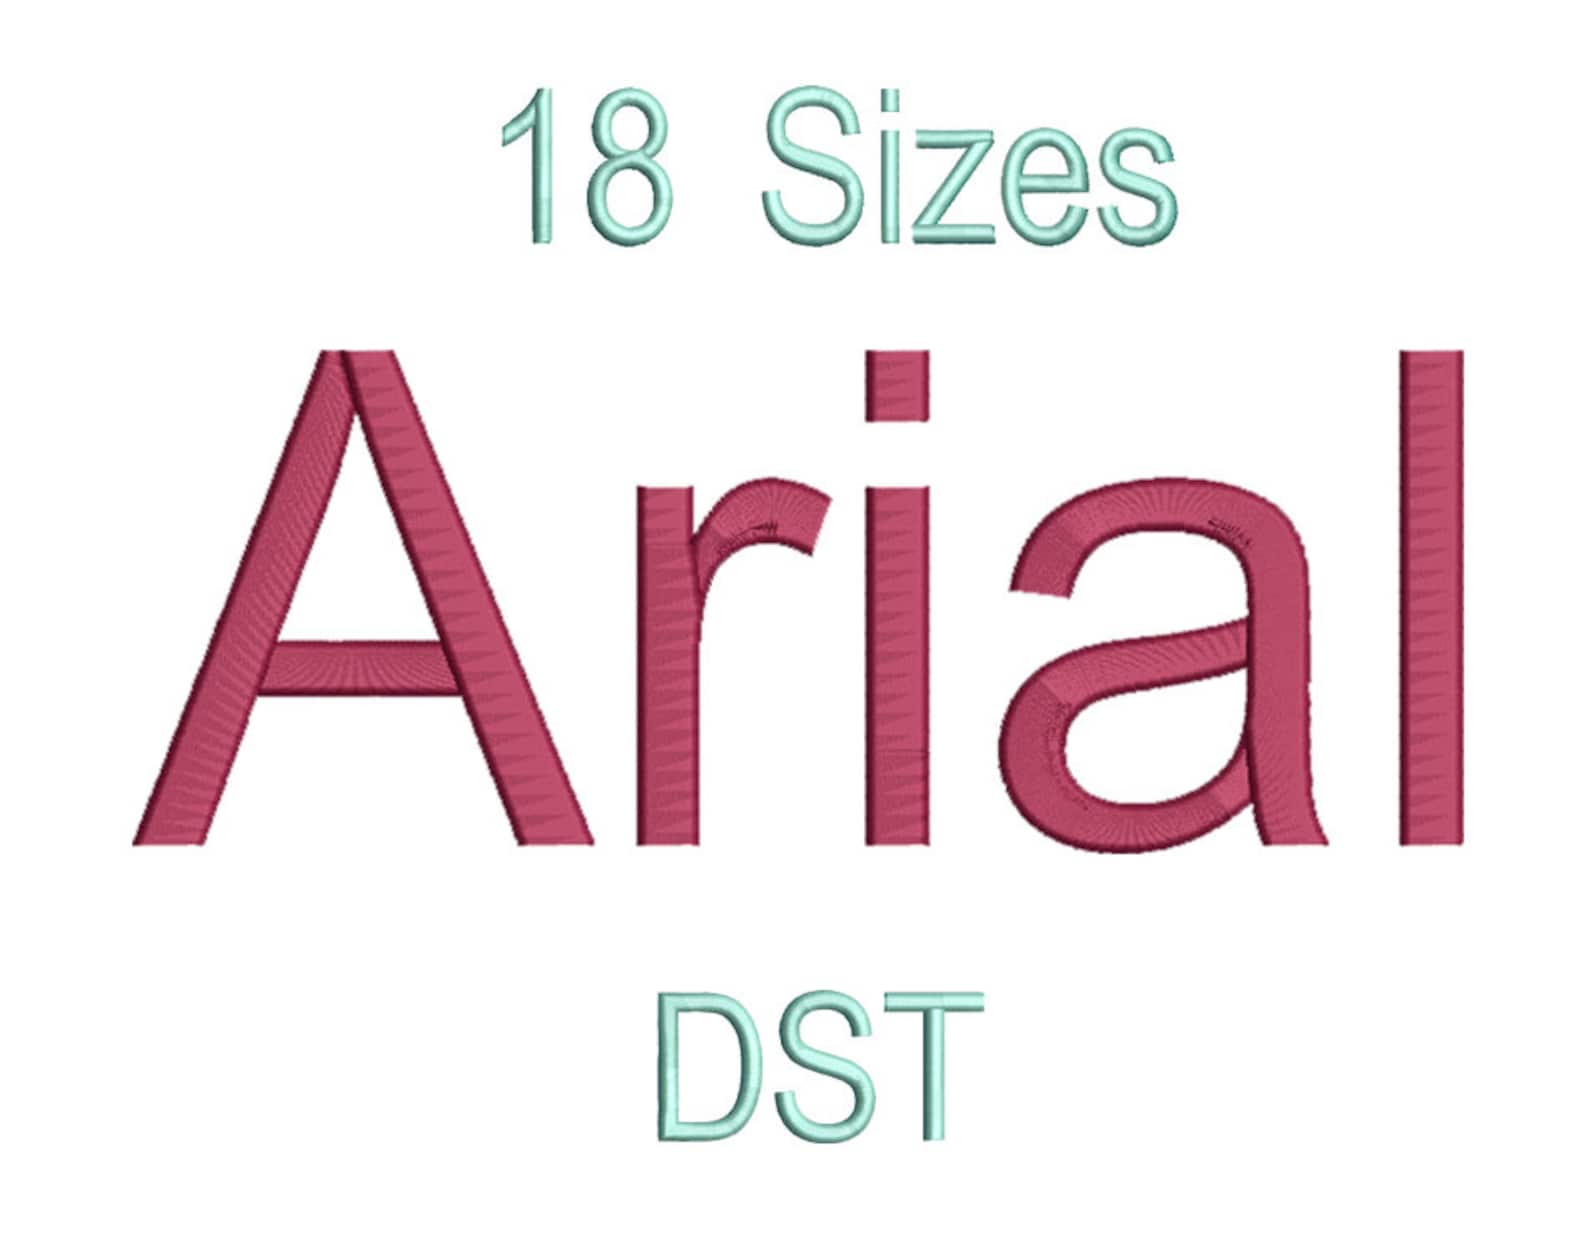 Arial rounded